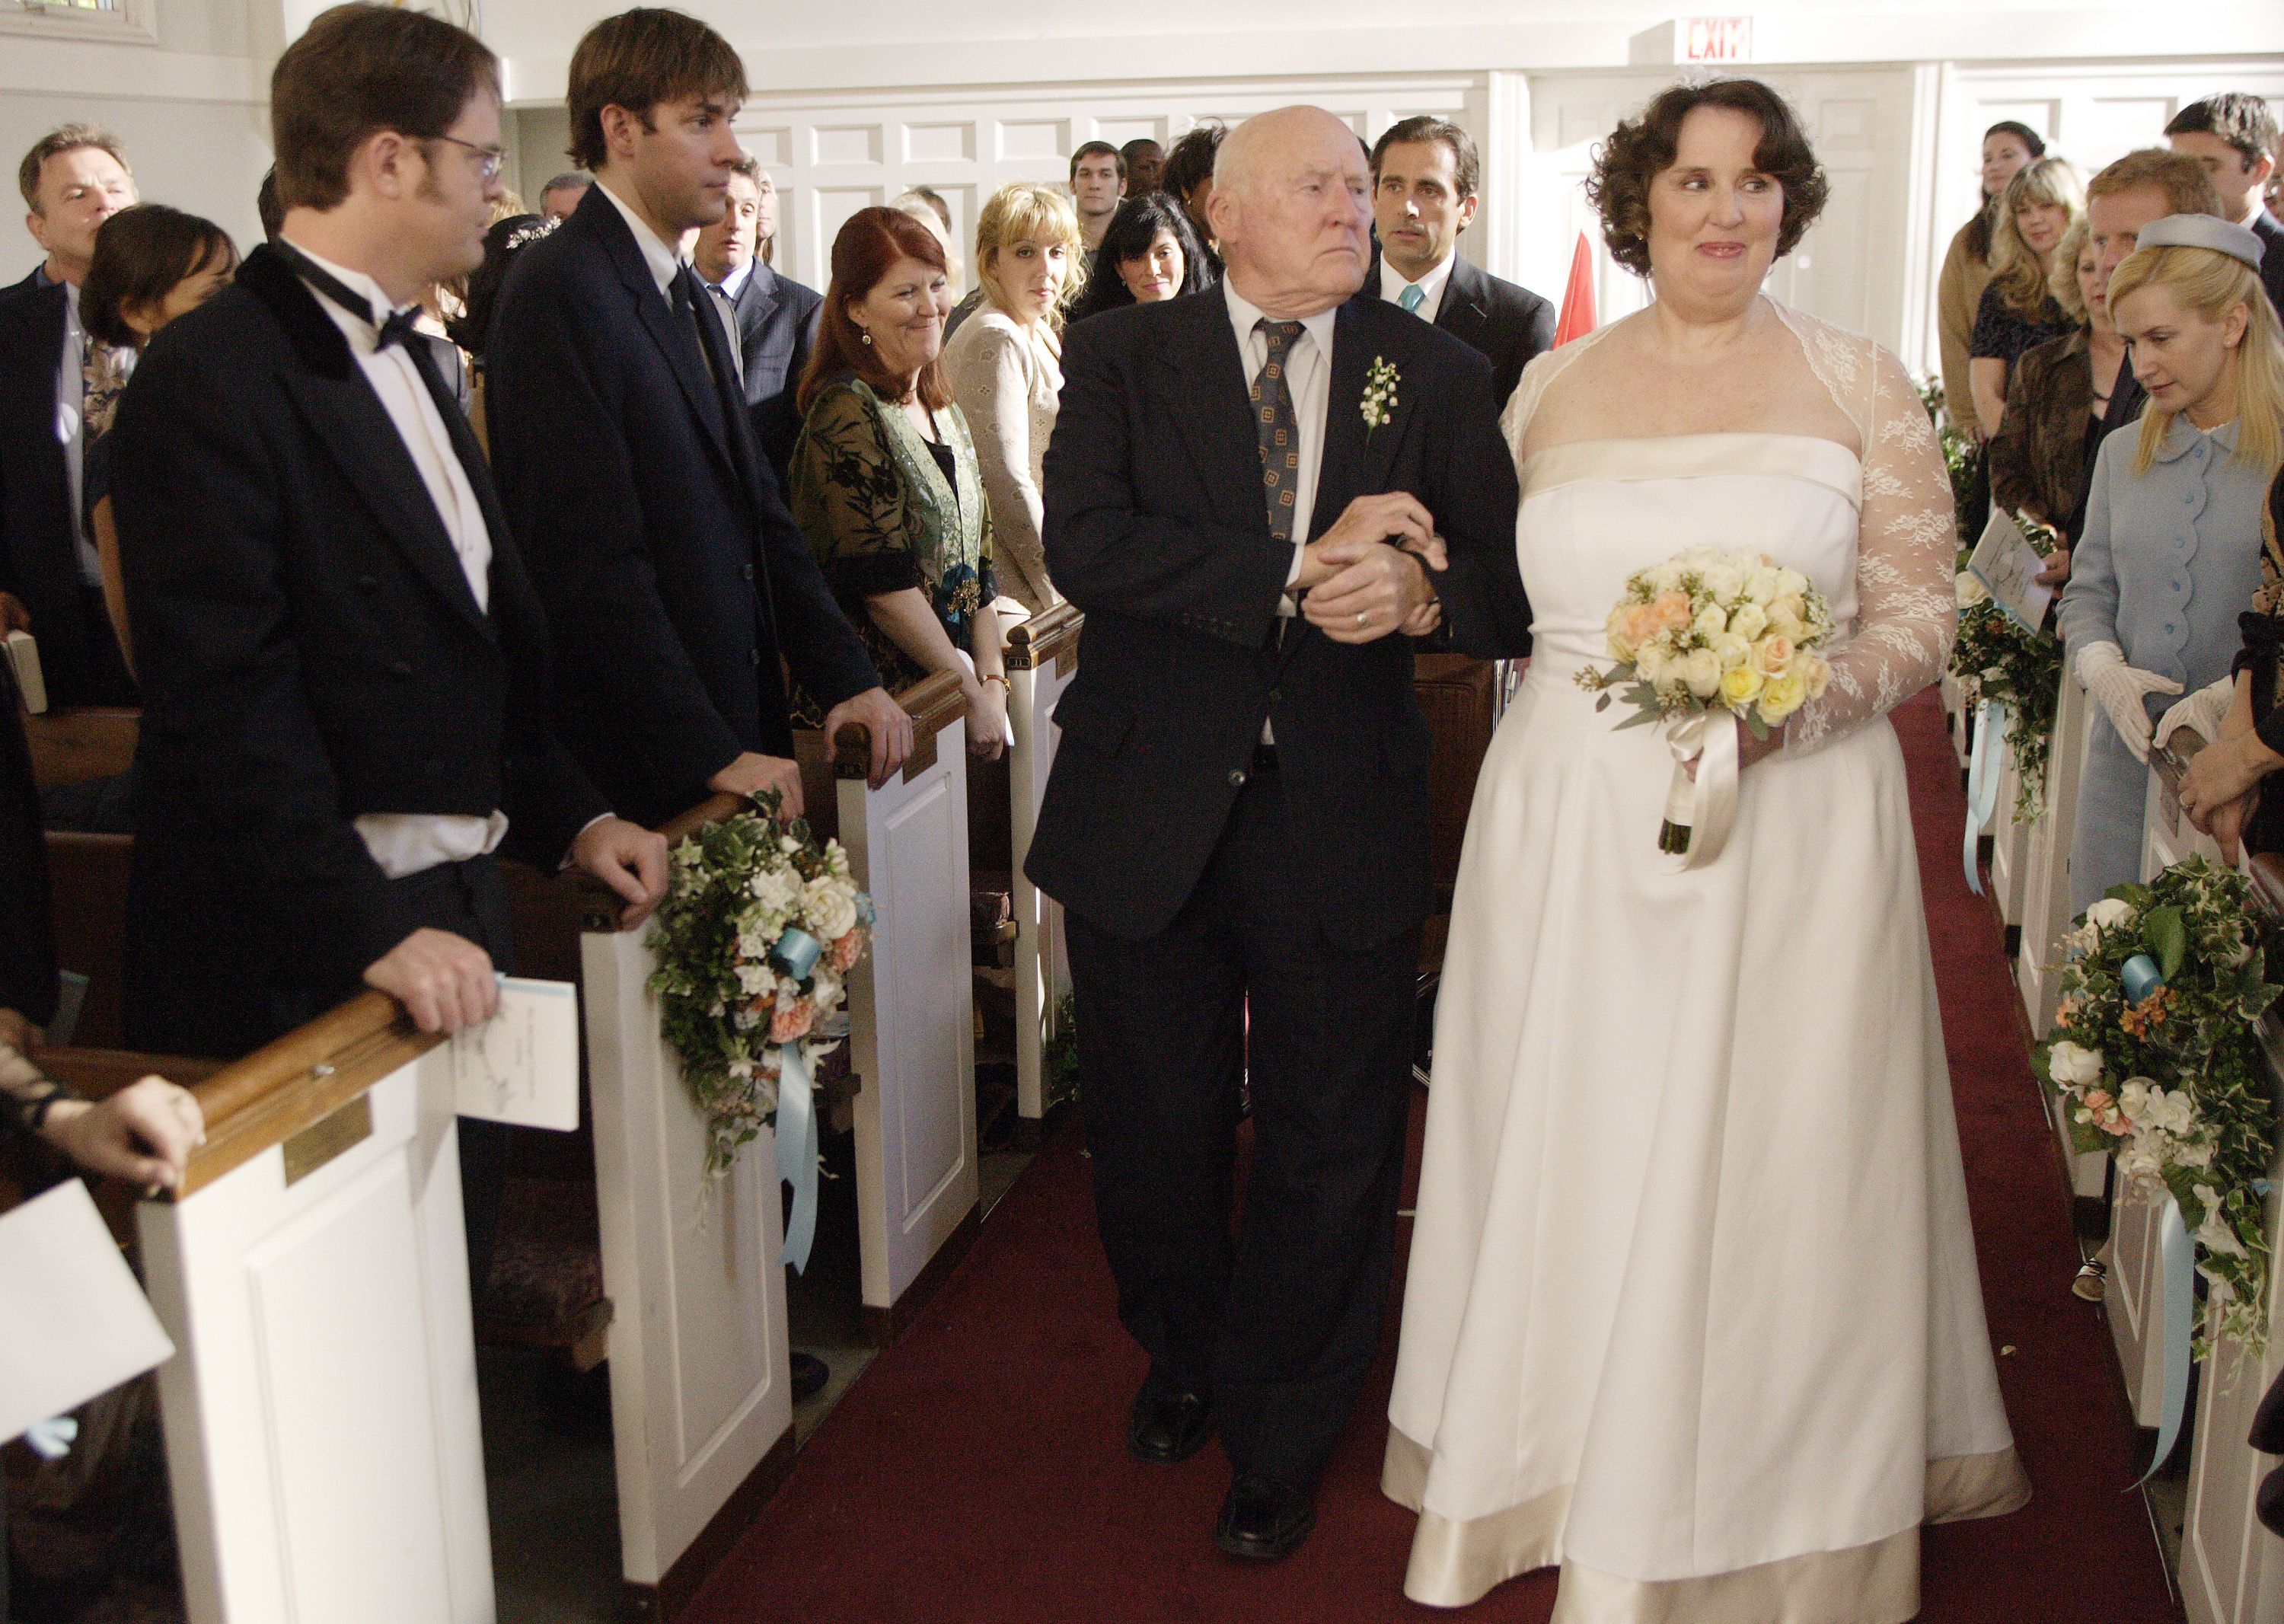 Phyllis walking down the aisle with her dad in The Office